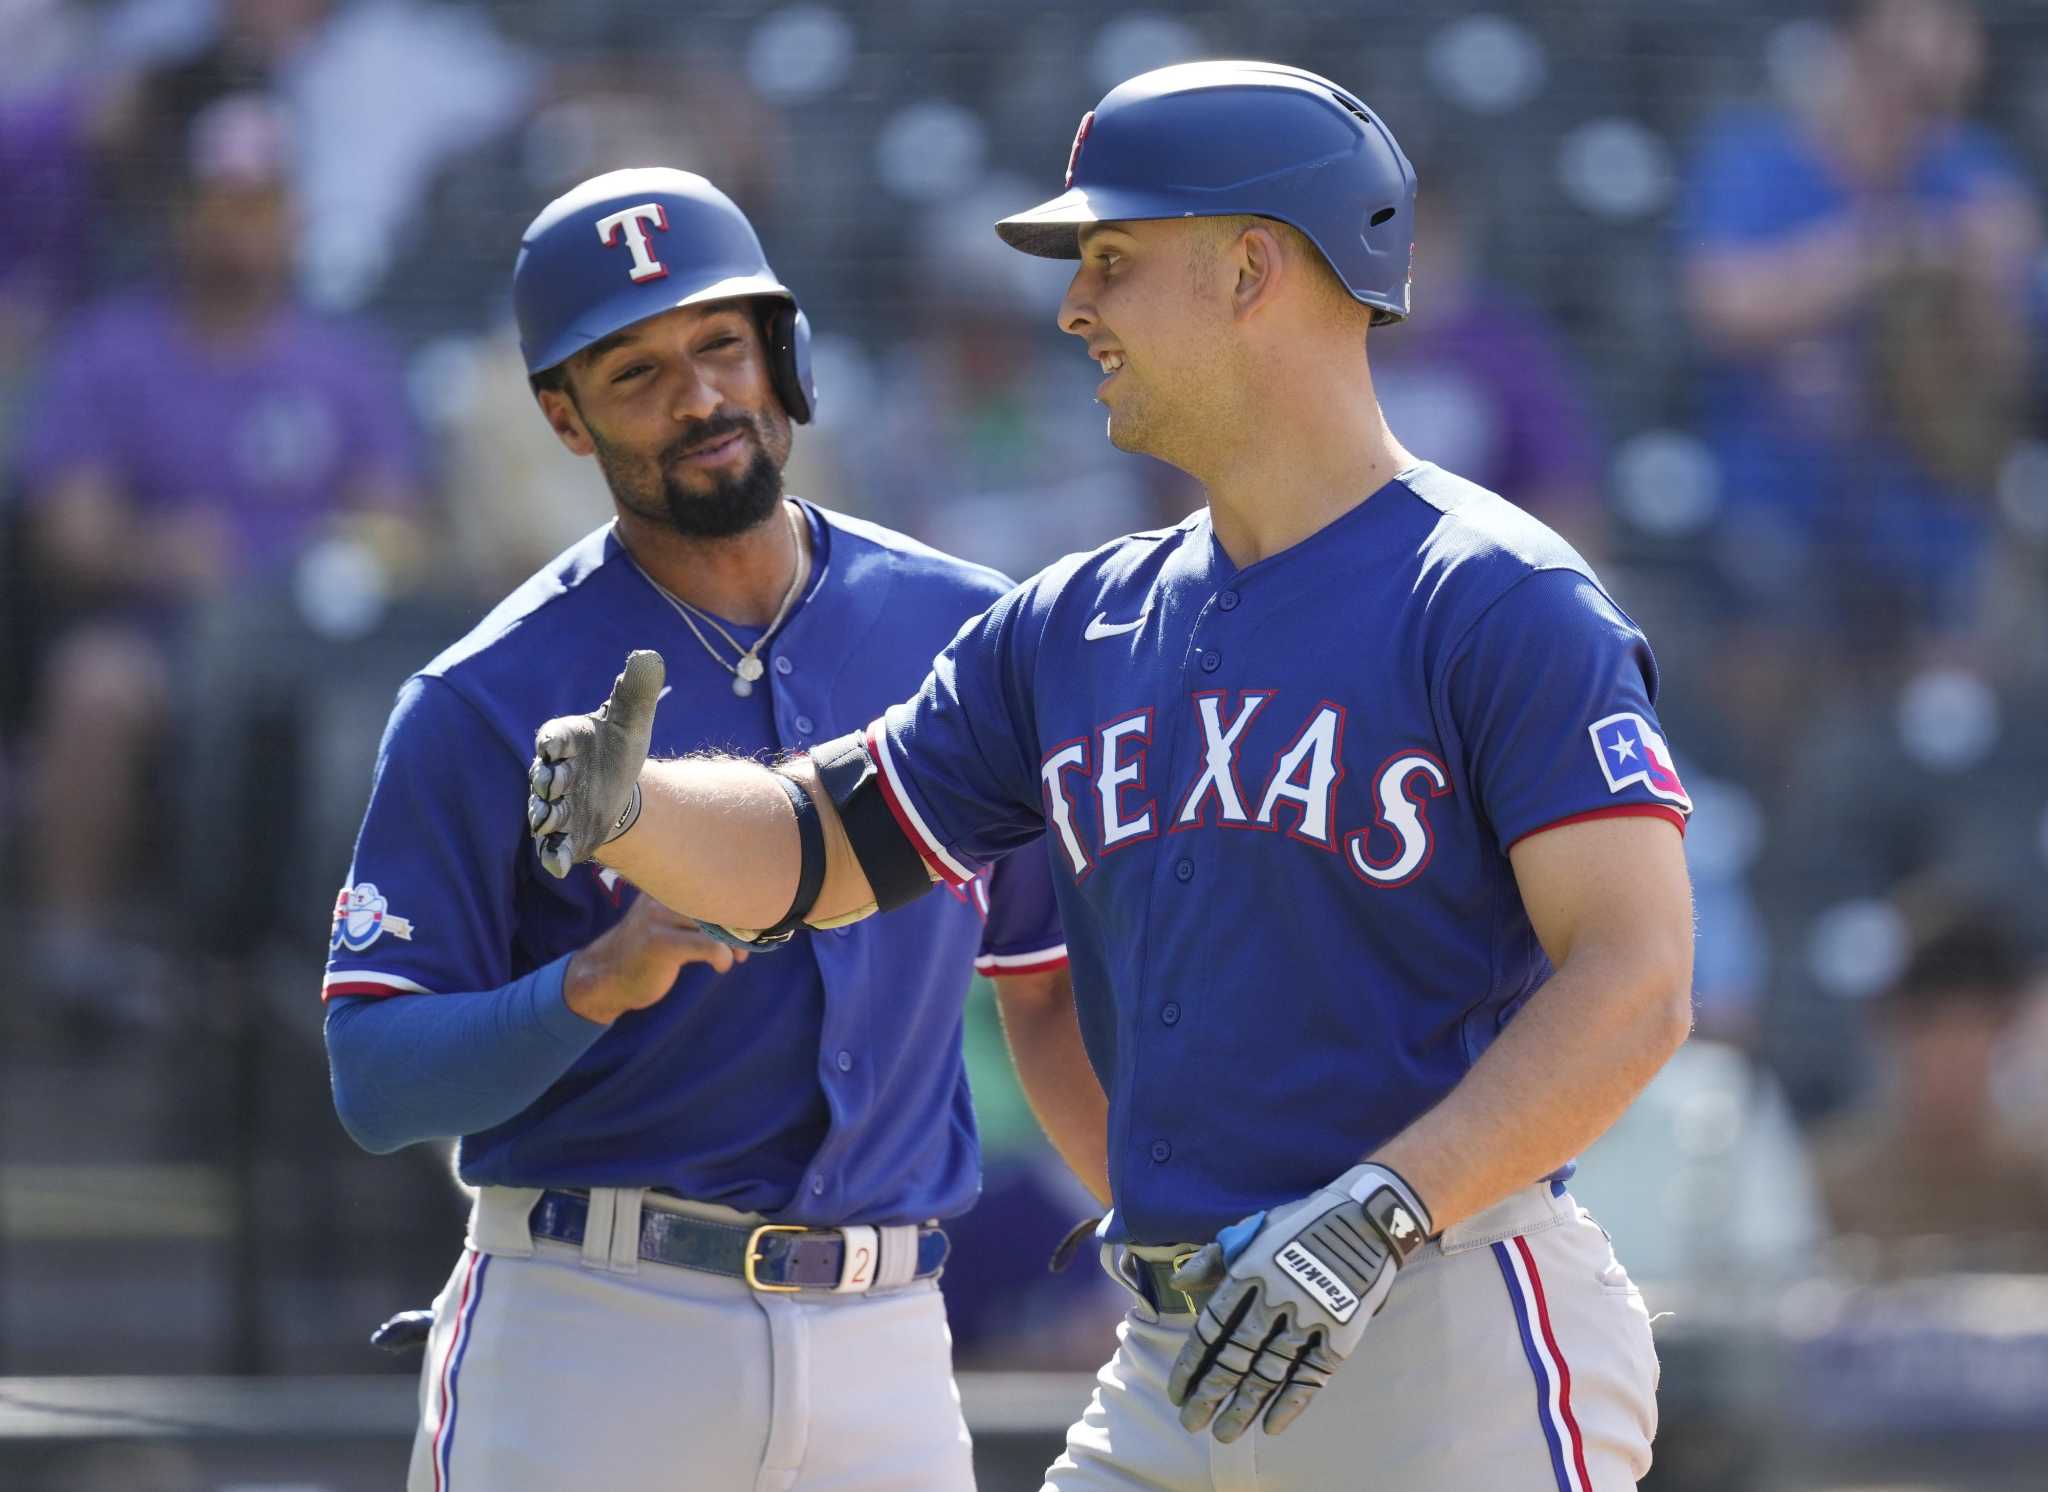 On deck: Texas Rangers at Astros